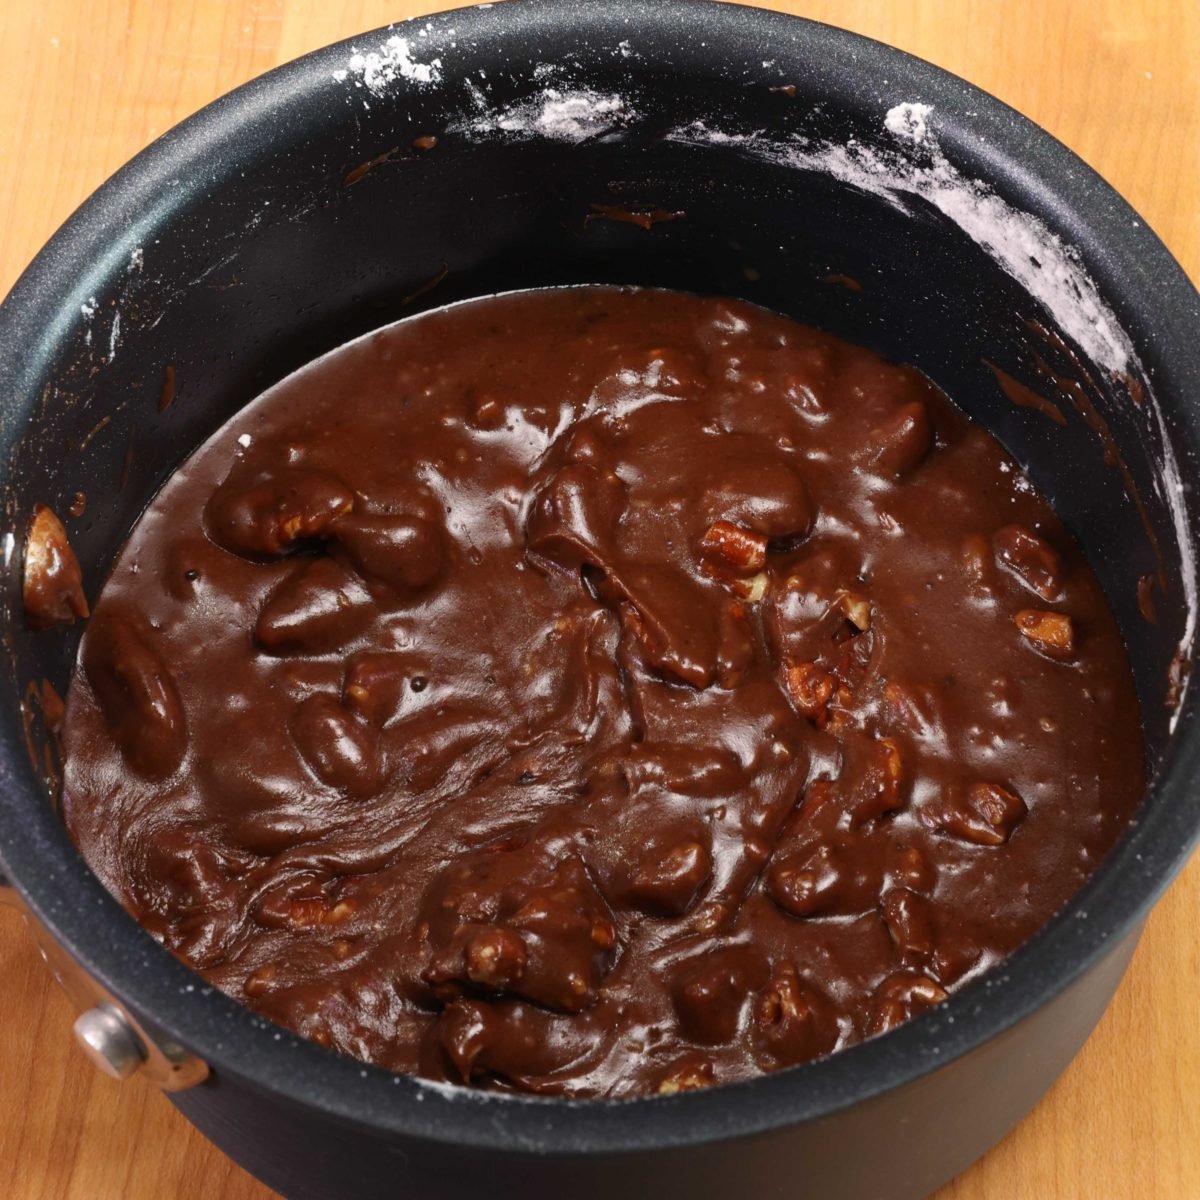 melted chocolate in a saucepan with nuts.